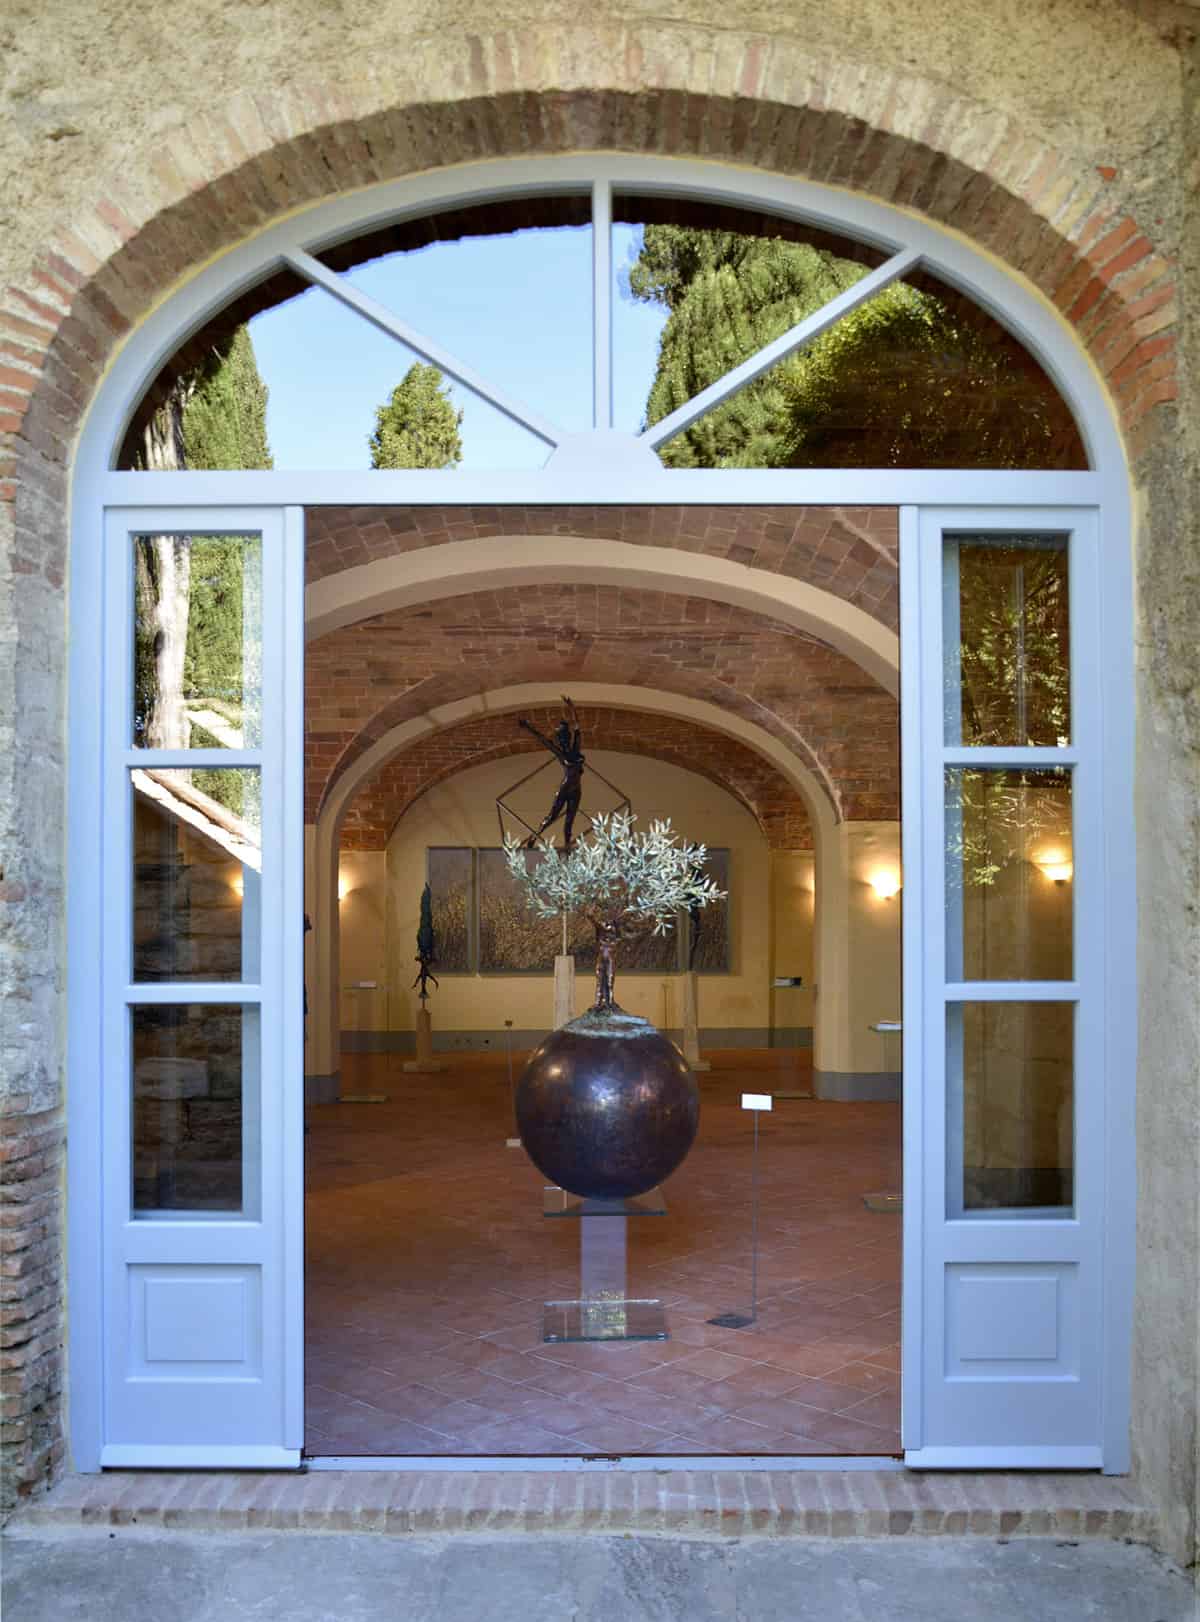 The new gallery entrance